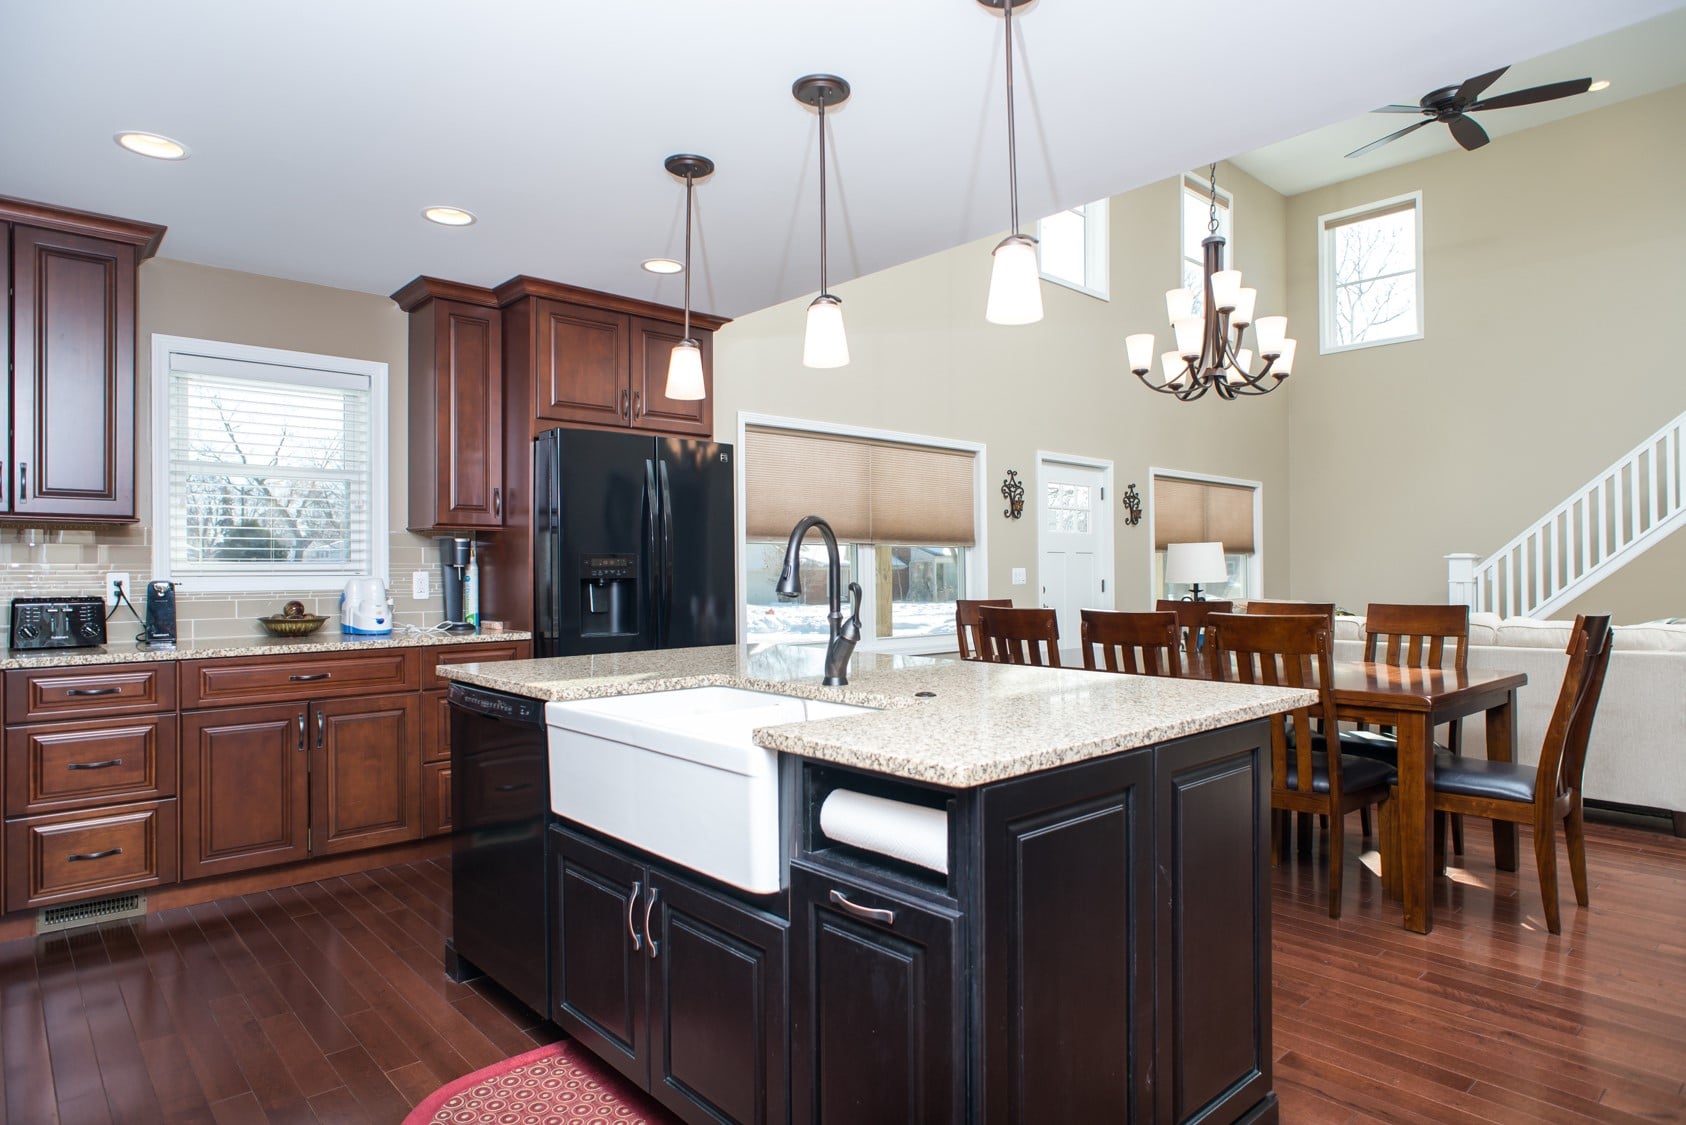 Avoid These 3 Common Kitchen Remodeling Mistakes